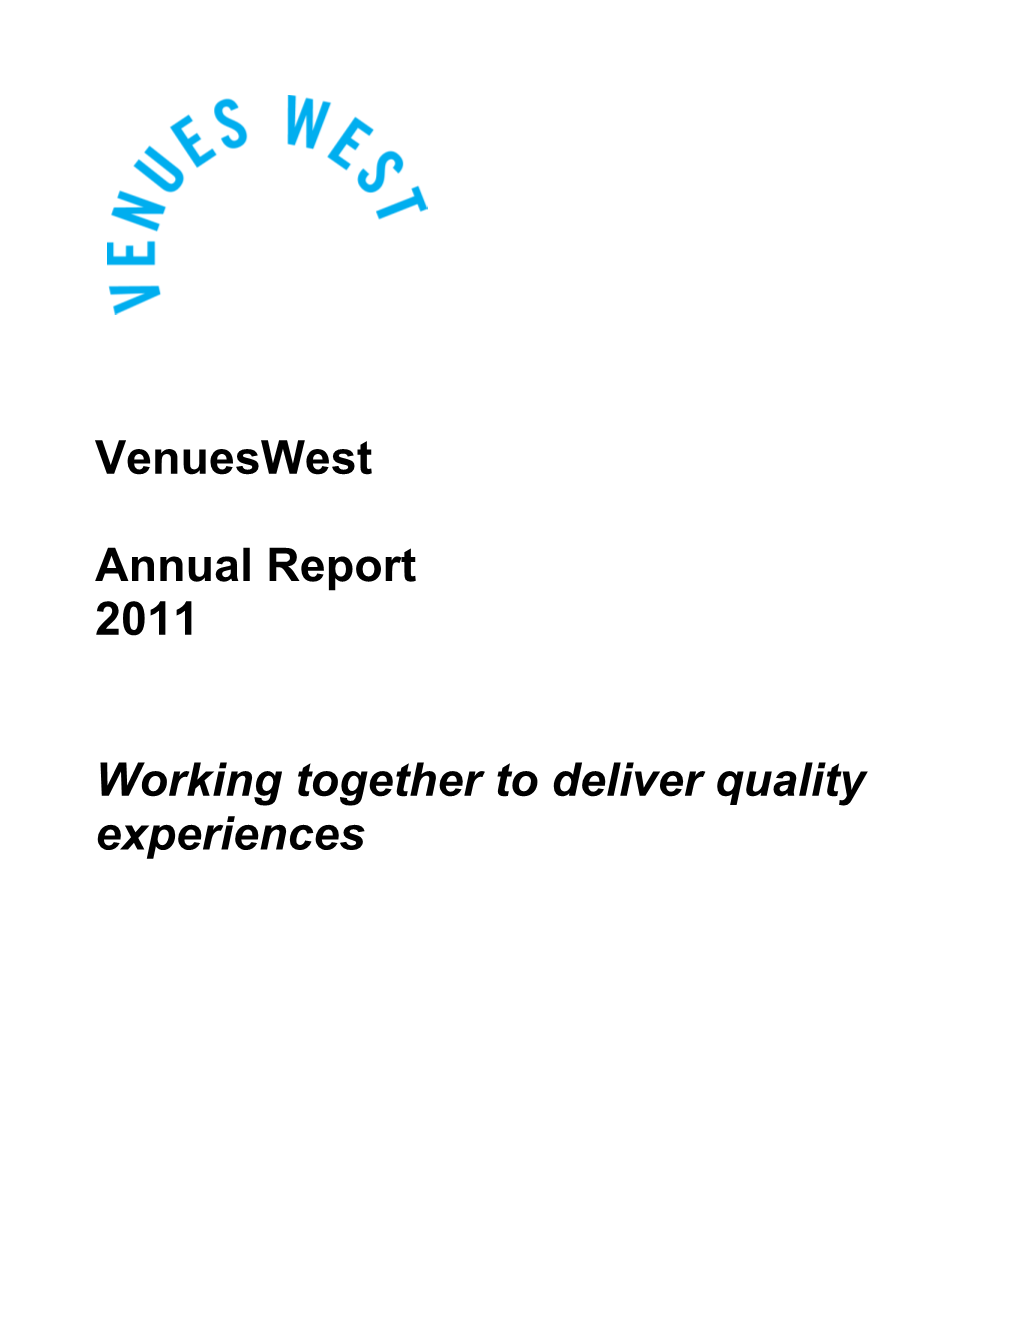 Venueswest Annual Report 2011 Working Together to Deliver Quality Experiences